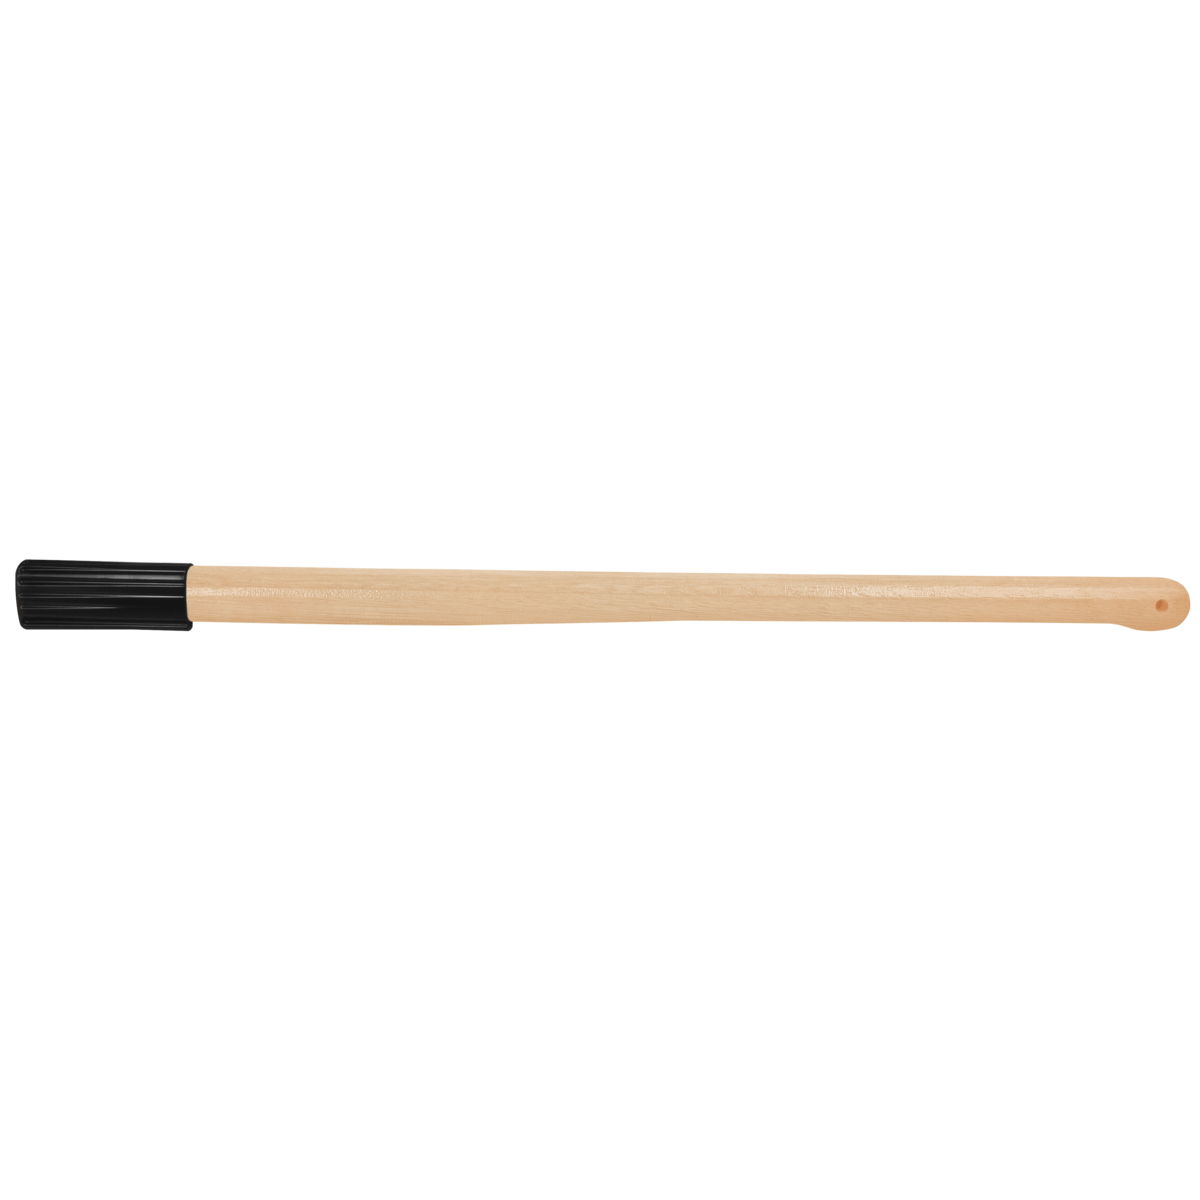 Tramontina 90cm Wooden Handle for Axe | Supply Master | Accra, Ghana Tools Building Steel Engineering Hardware tool